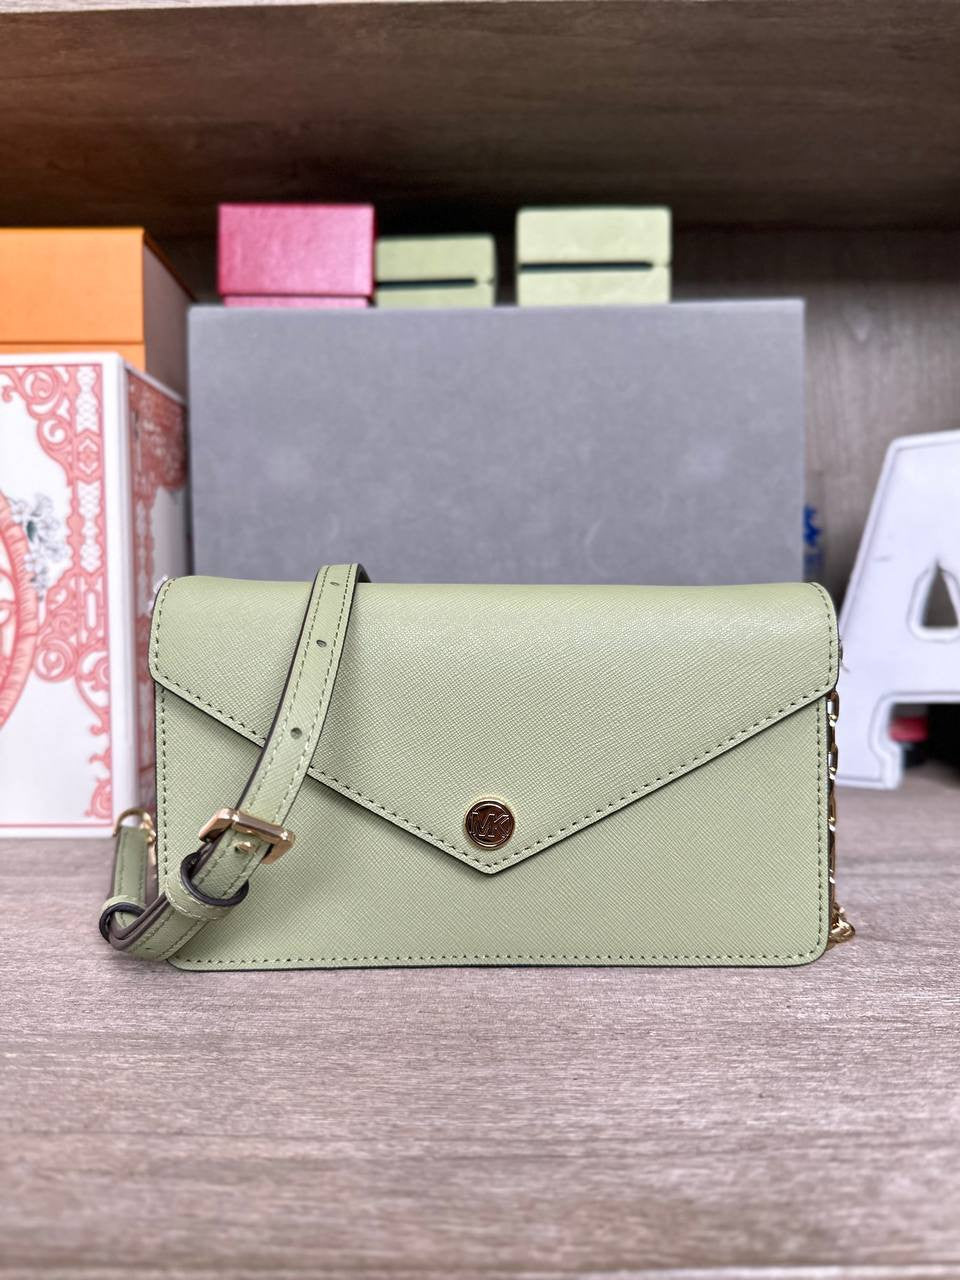 Michael Kors Small Saffiano Leather Envelope Crossbody Bag in Light Sage (35S3GTVC5L)